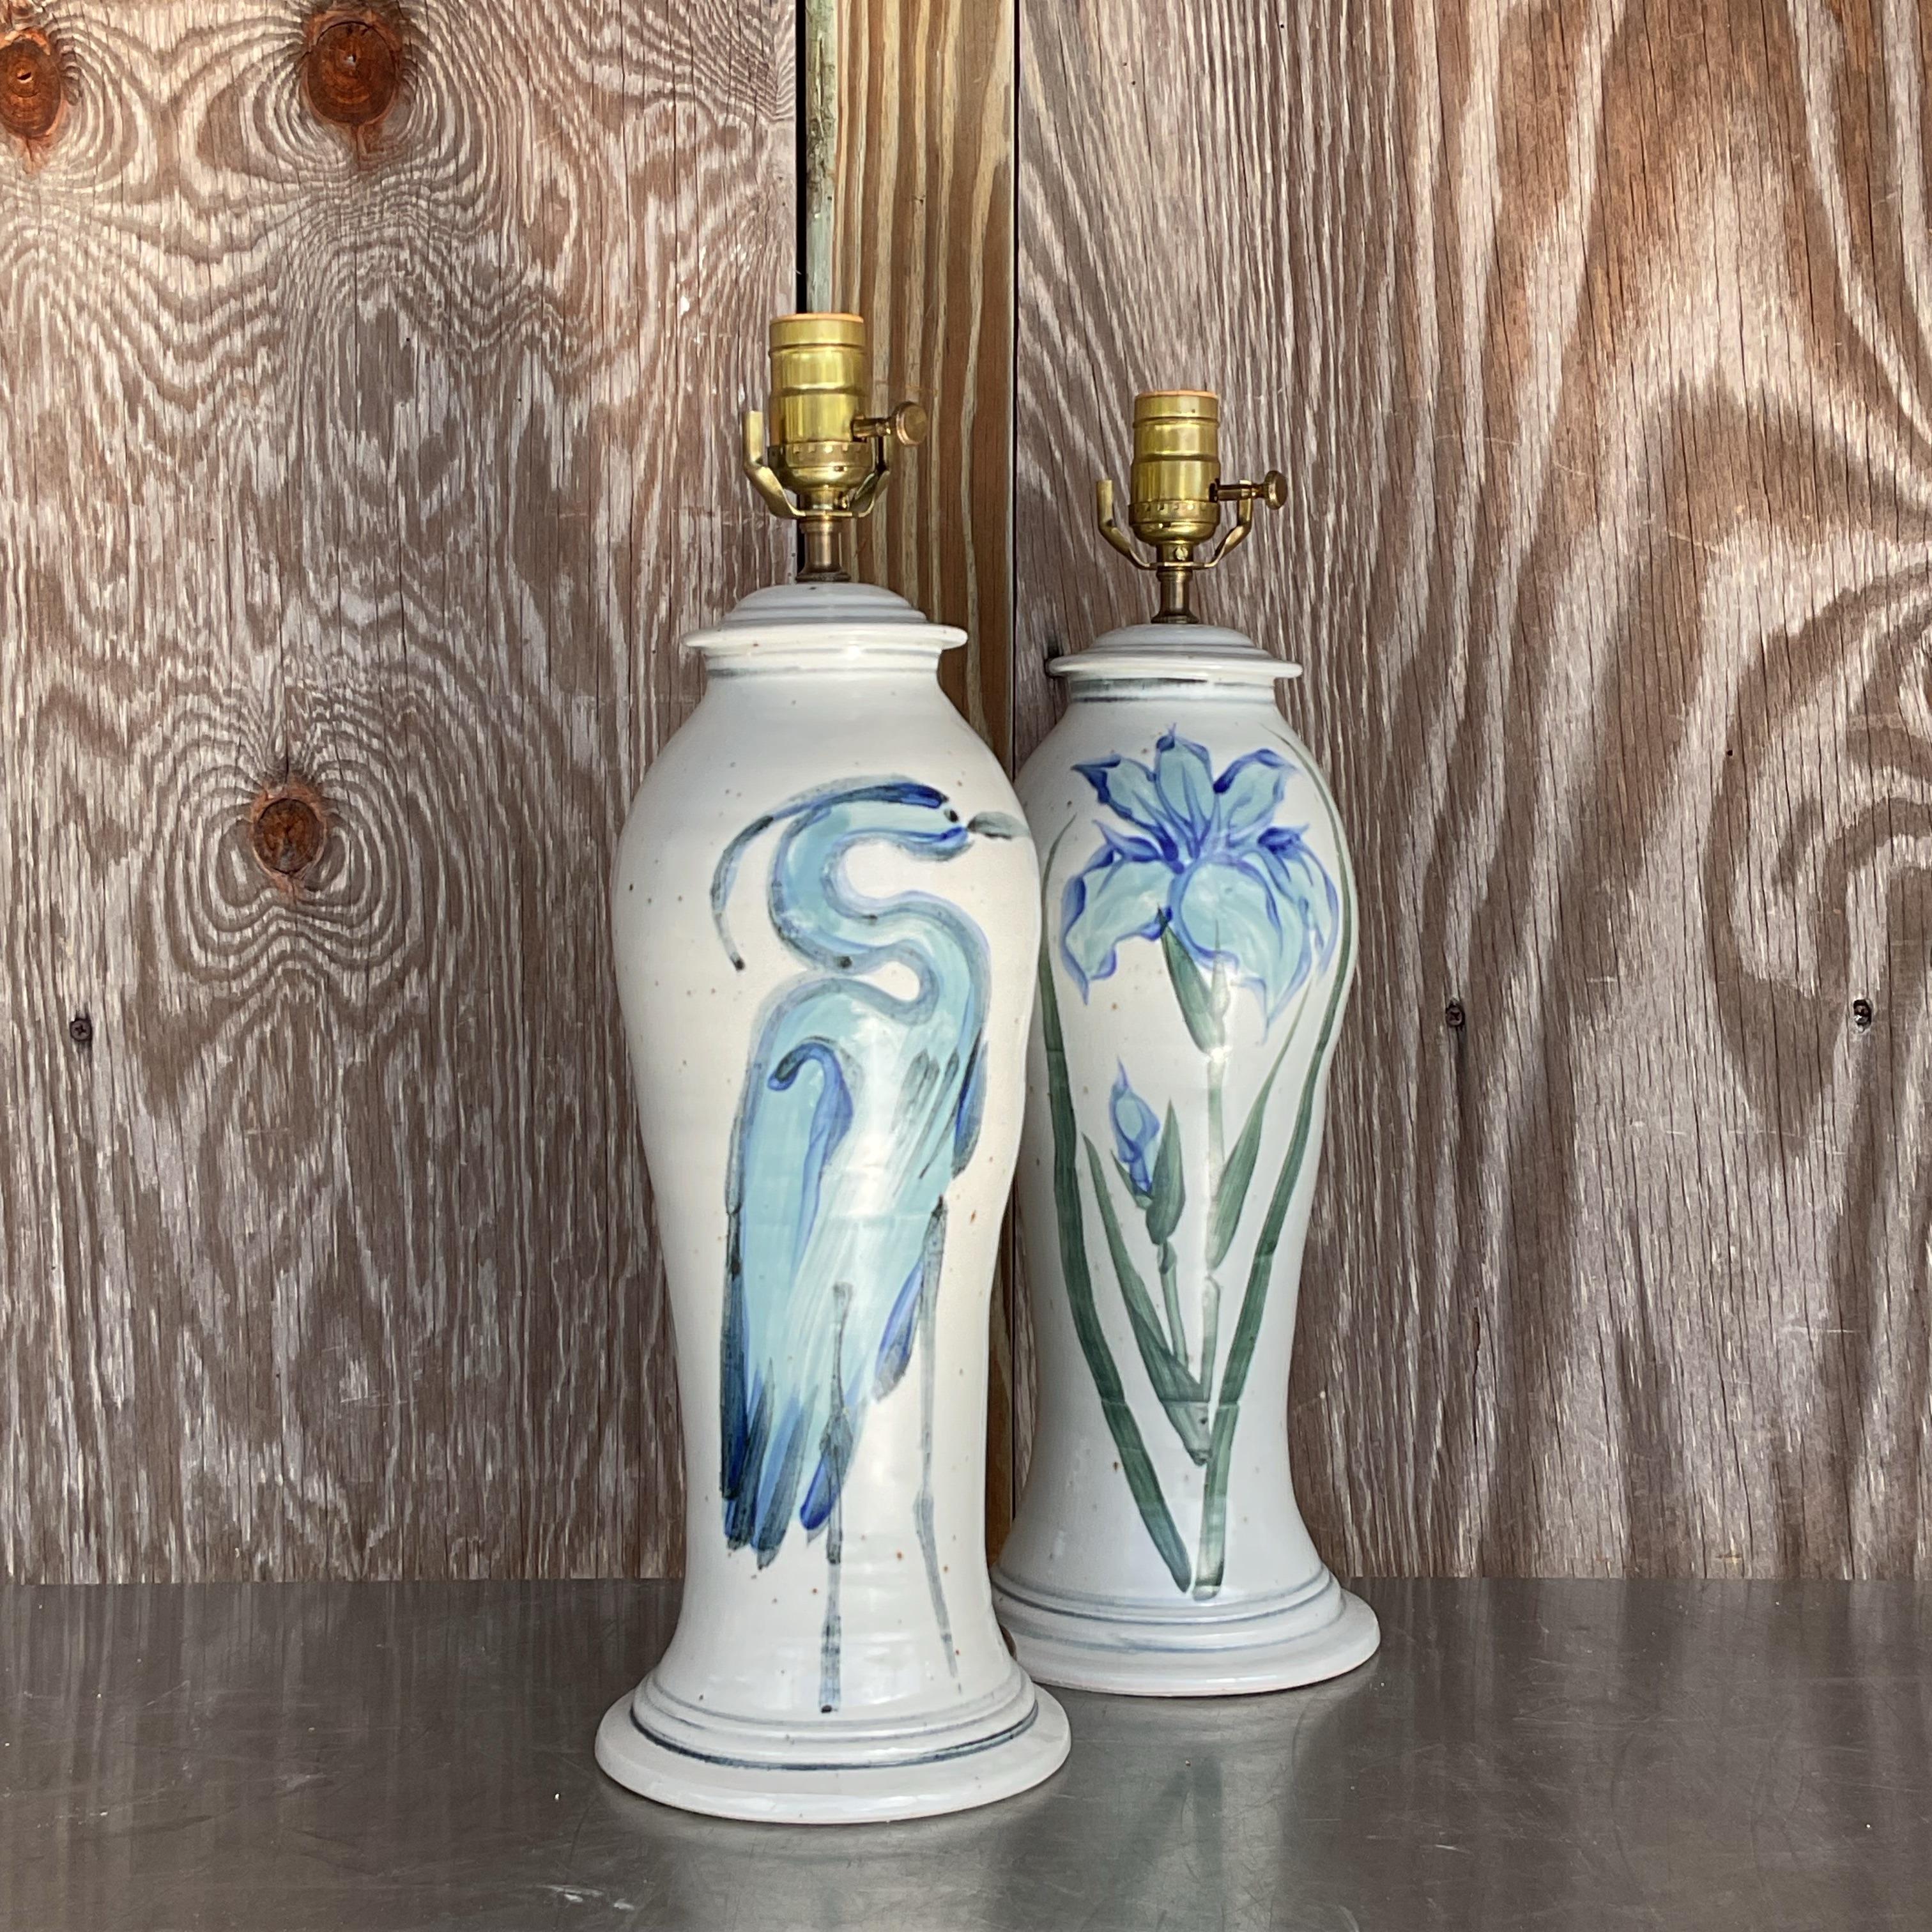 Beautiful pair of hand painted ceramic Florida motif lamps with ornate flowers and bamboo and a crane in elegant blue hues. Whimsical addition to any credenza or guest room. Acquired from a Palm Beach estate.